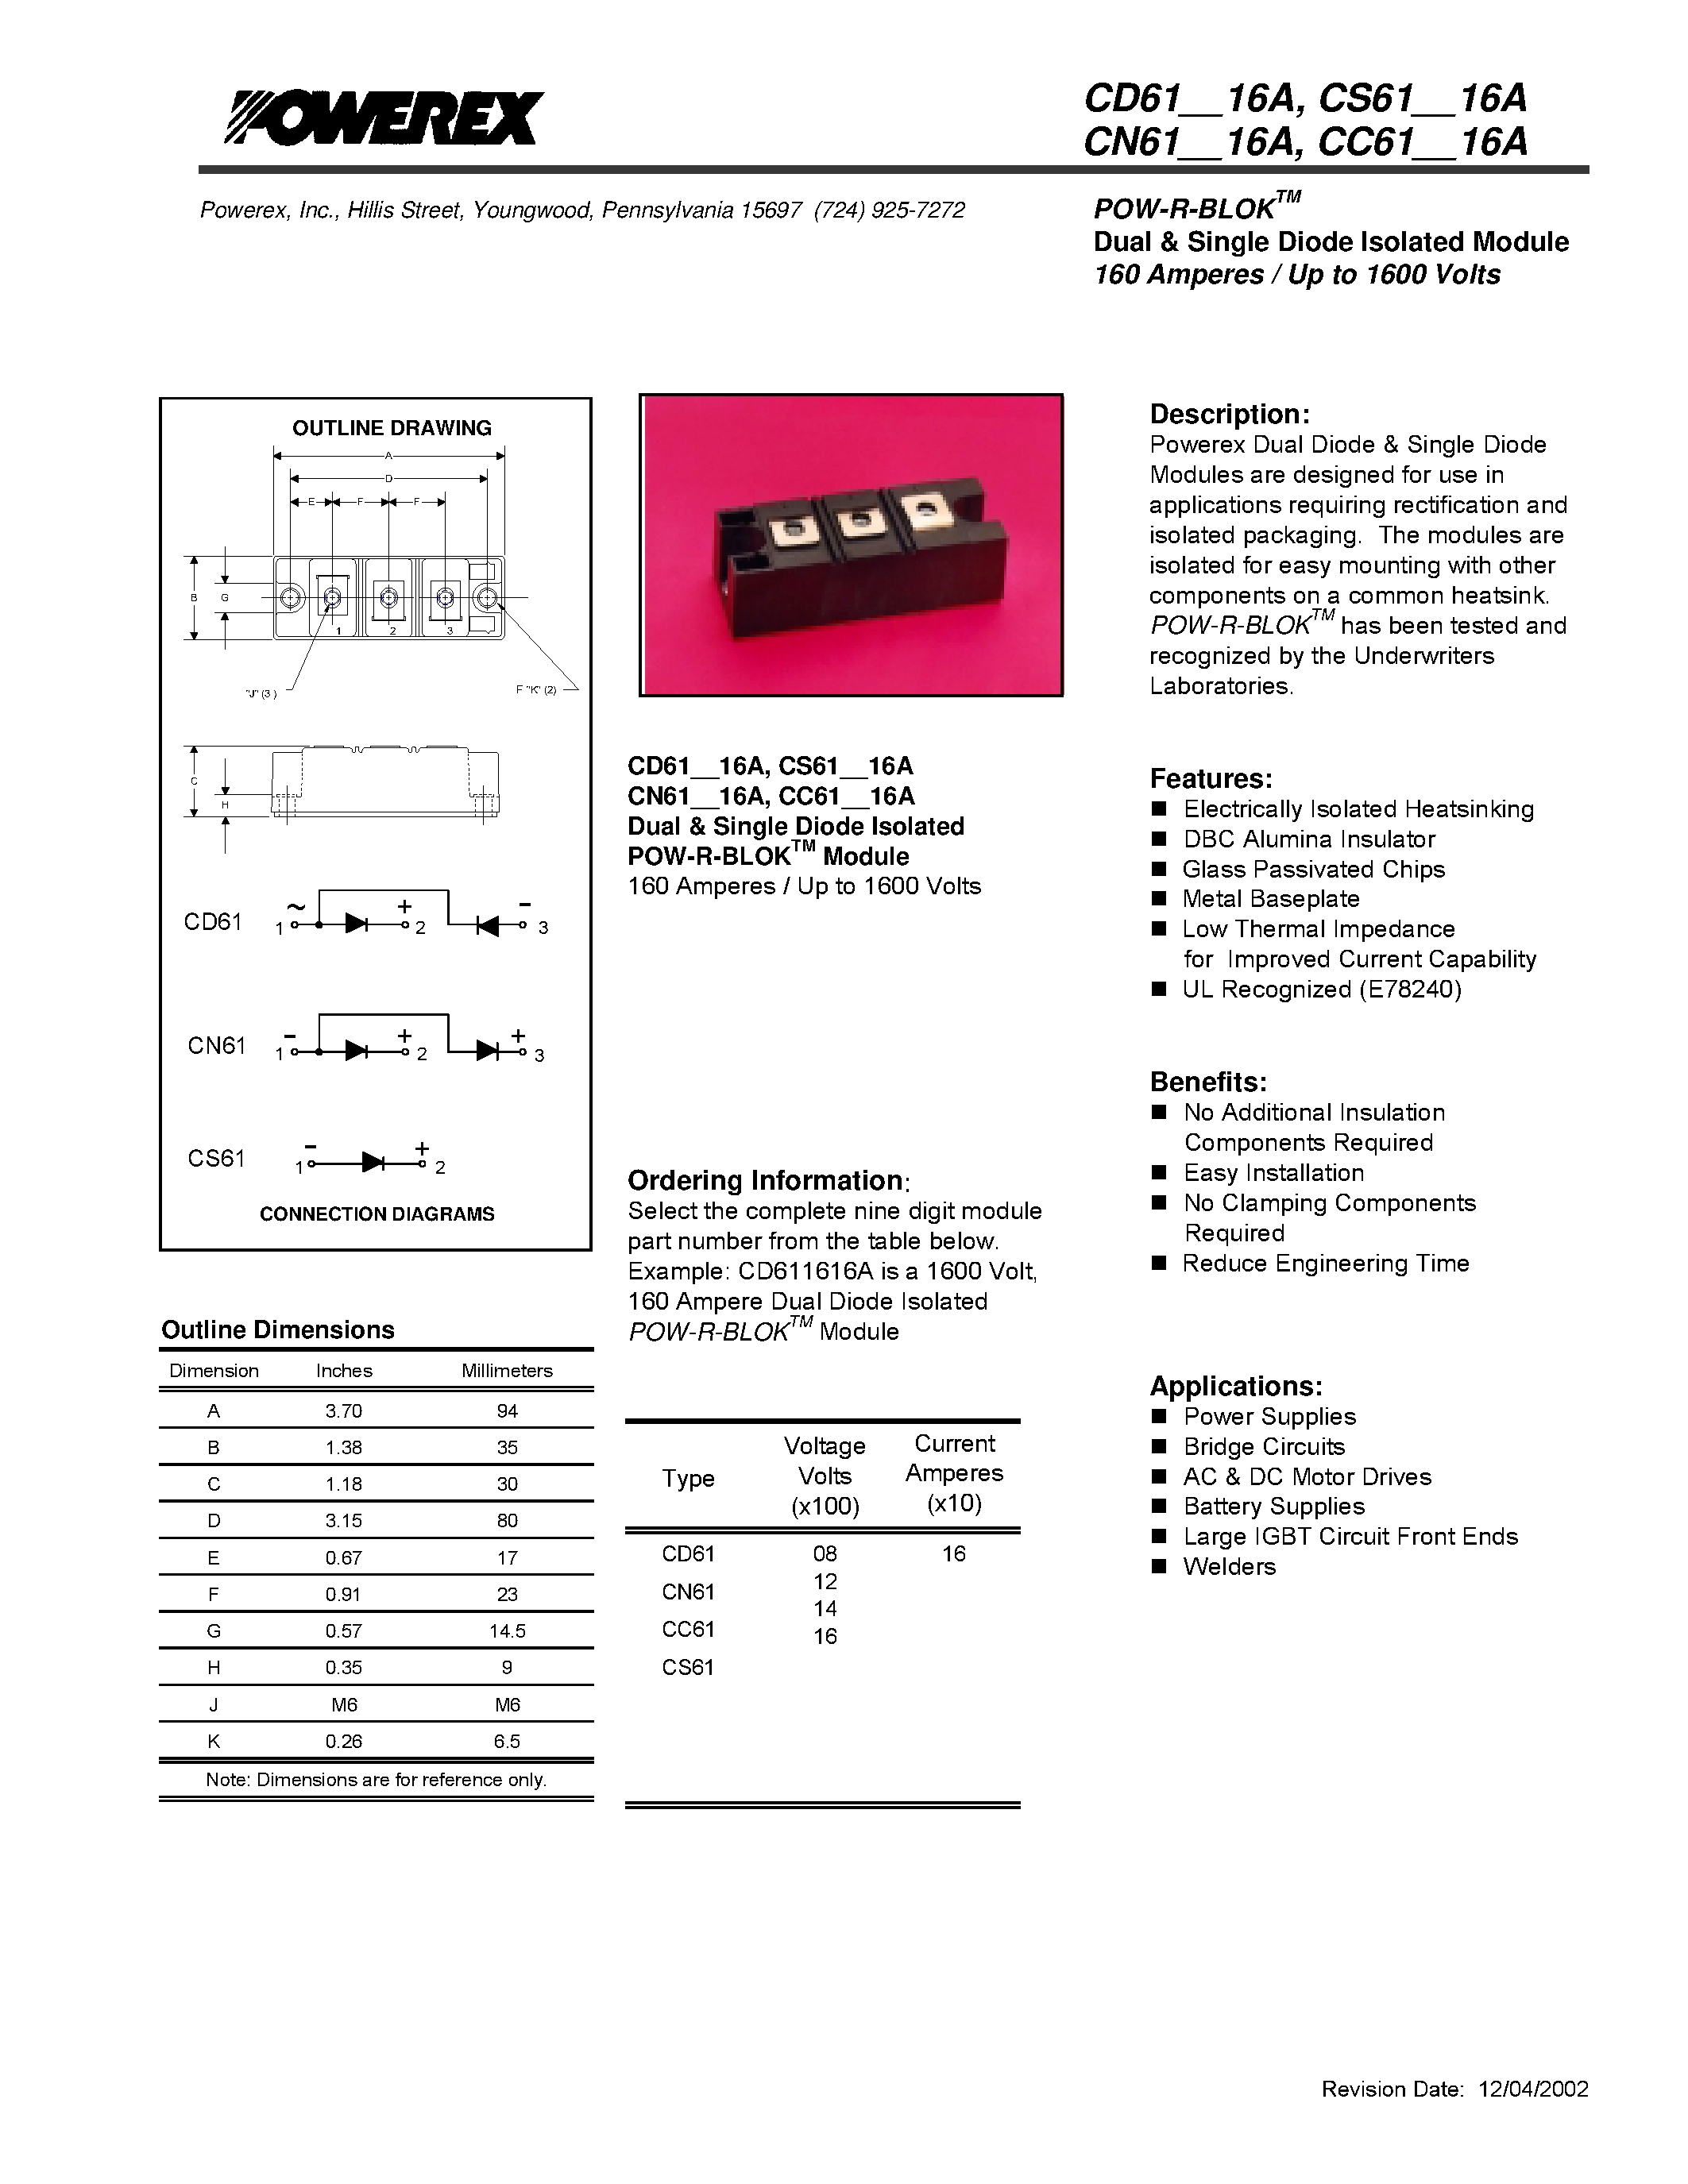 Datasheet CD611616A - POW-R-BLOK Dual & Single Diode Isolated Module 160 Amperes / Up to 1600 Volts page 1